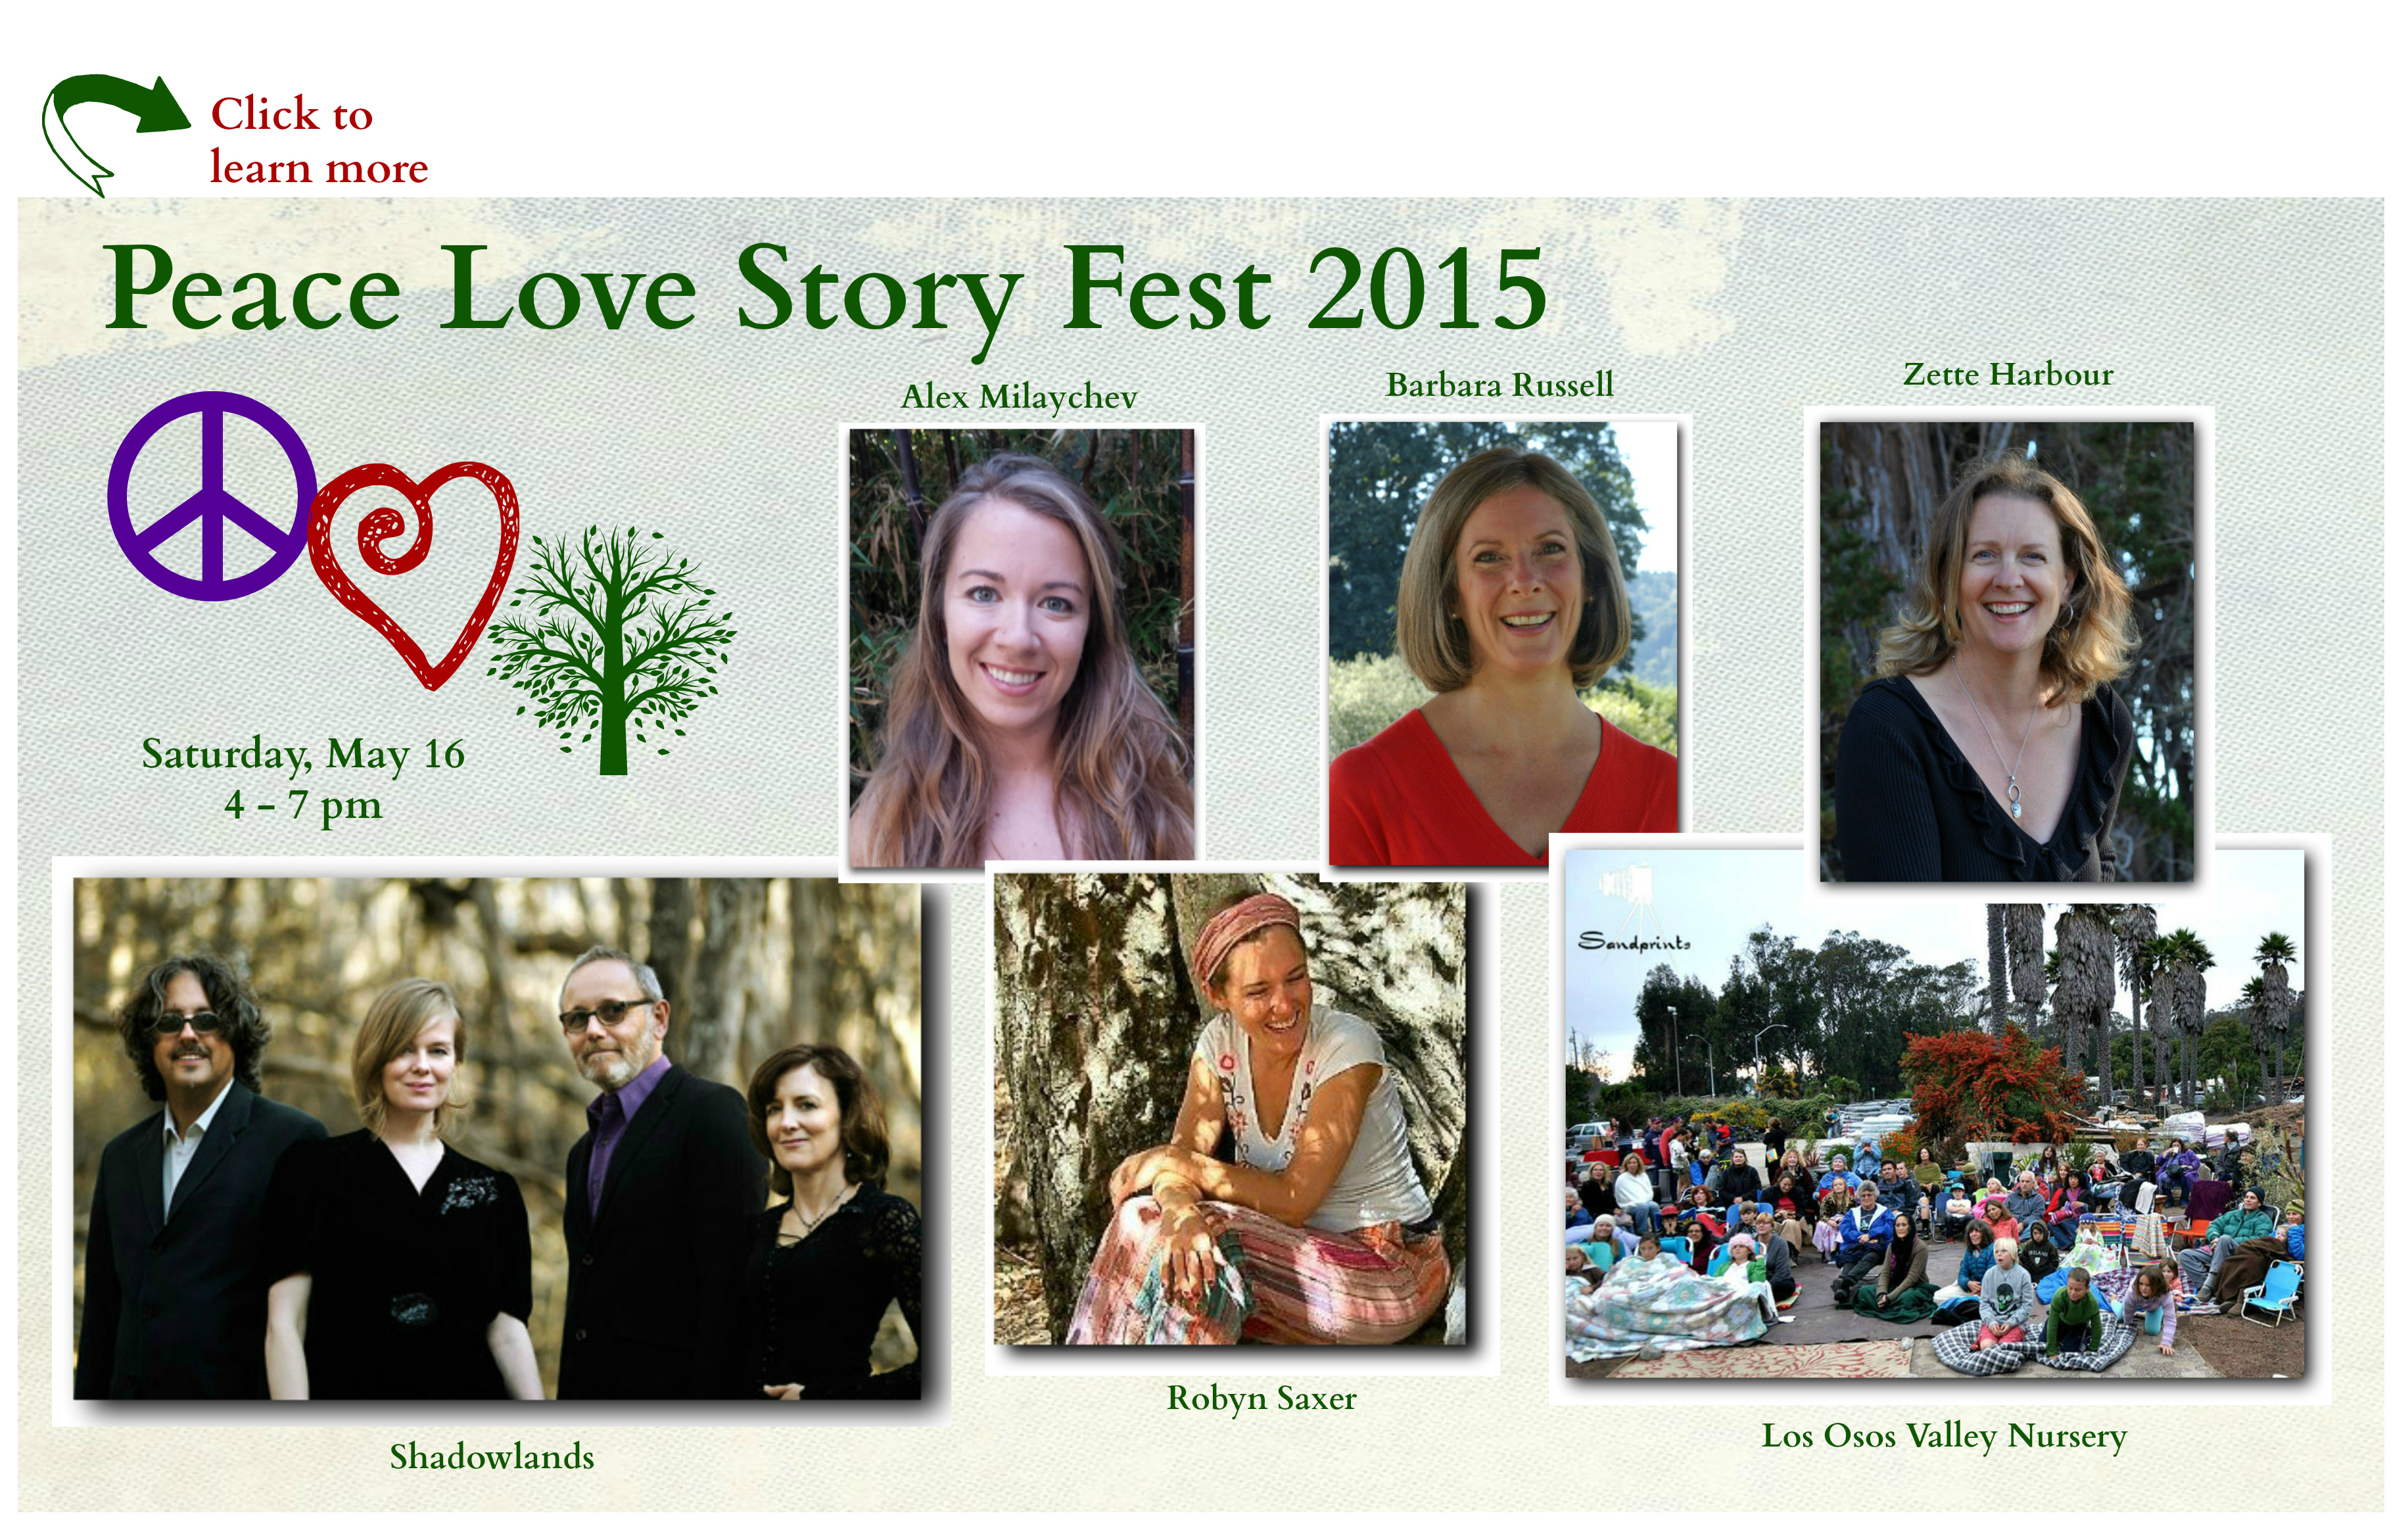 Peace Love Story Fest 2015 storytellers and musicians